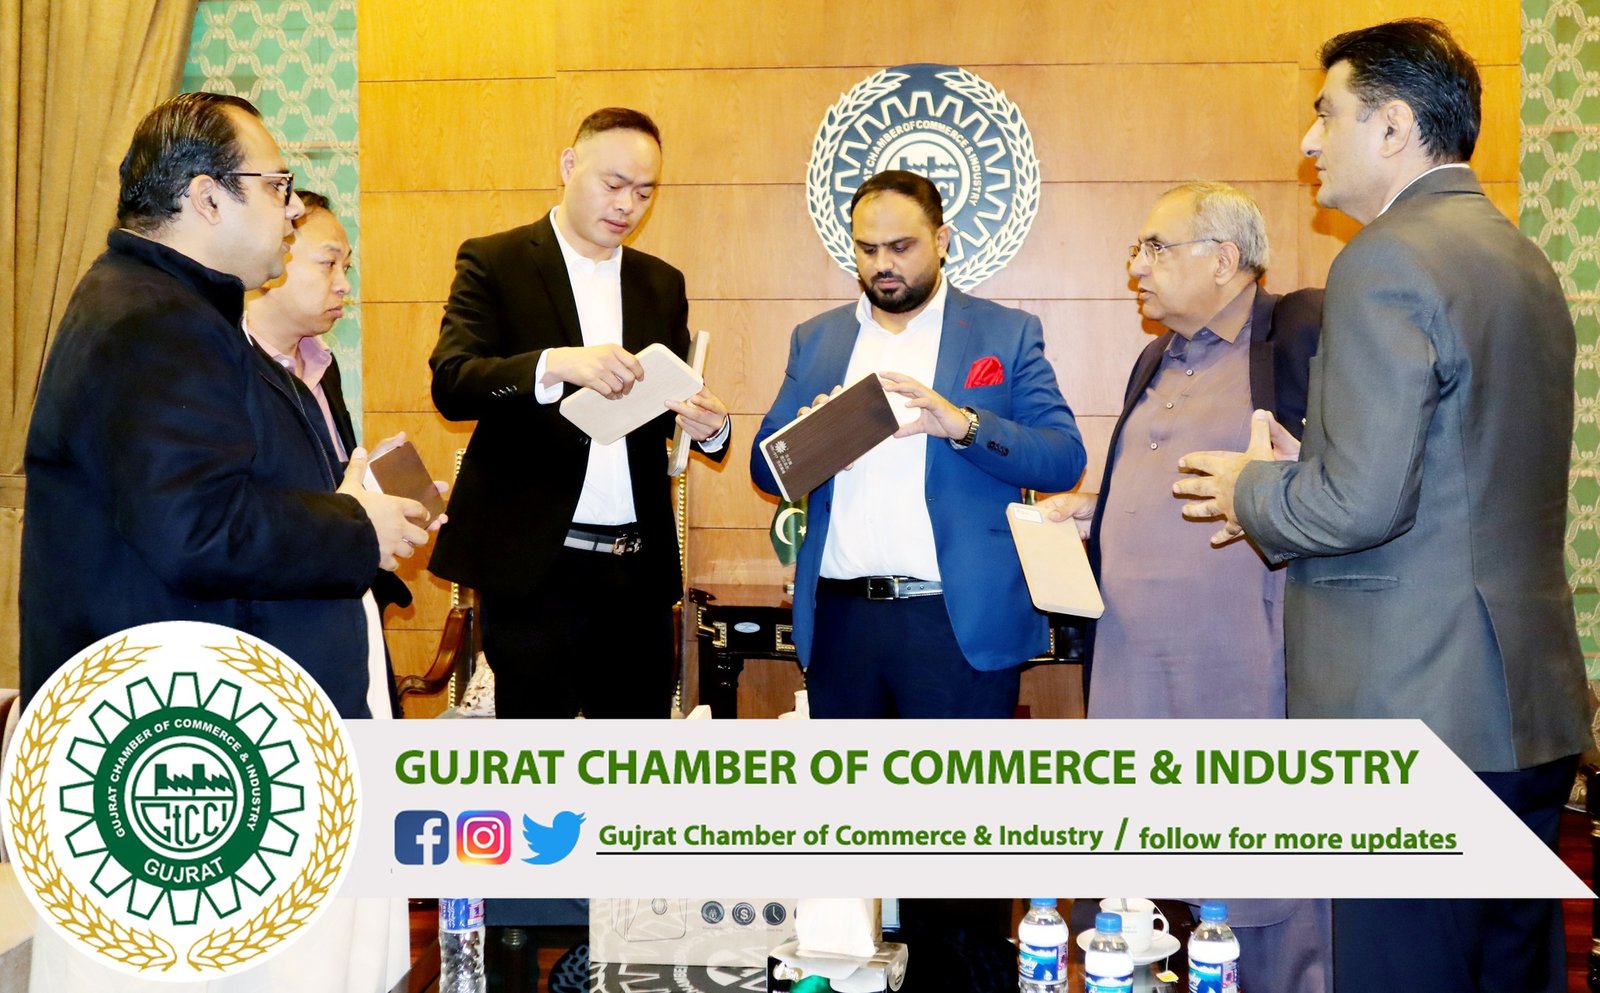 A #delegation of #PakChina joint #chamber visited Gujrat Chamber of Commerce & Industry and met Mr. Muhammad Asad Bhatti #VicePresident #GtCCI and Mr. Hammad Aslam Chairman Furniture Association. #Delegation of #PakChina joint Chamber includes Chinese businessmen Zhang Shaogoo, Xic Qinghao and Mr. Shakeel Lon #Chairman China committee.